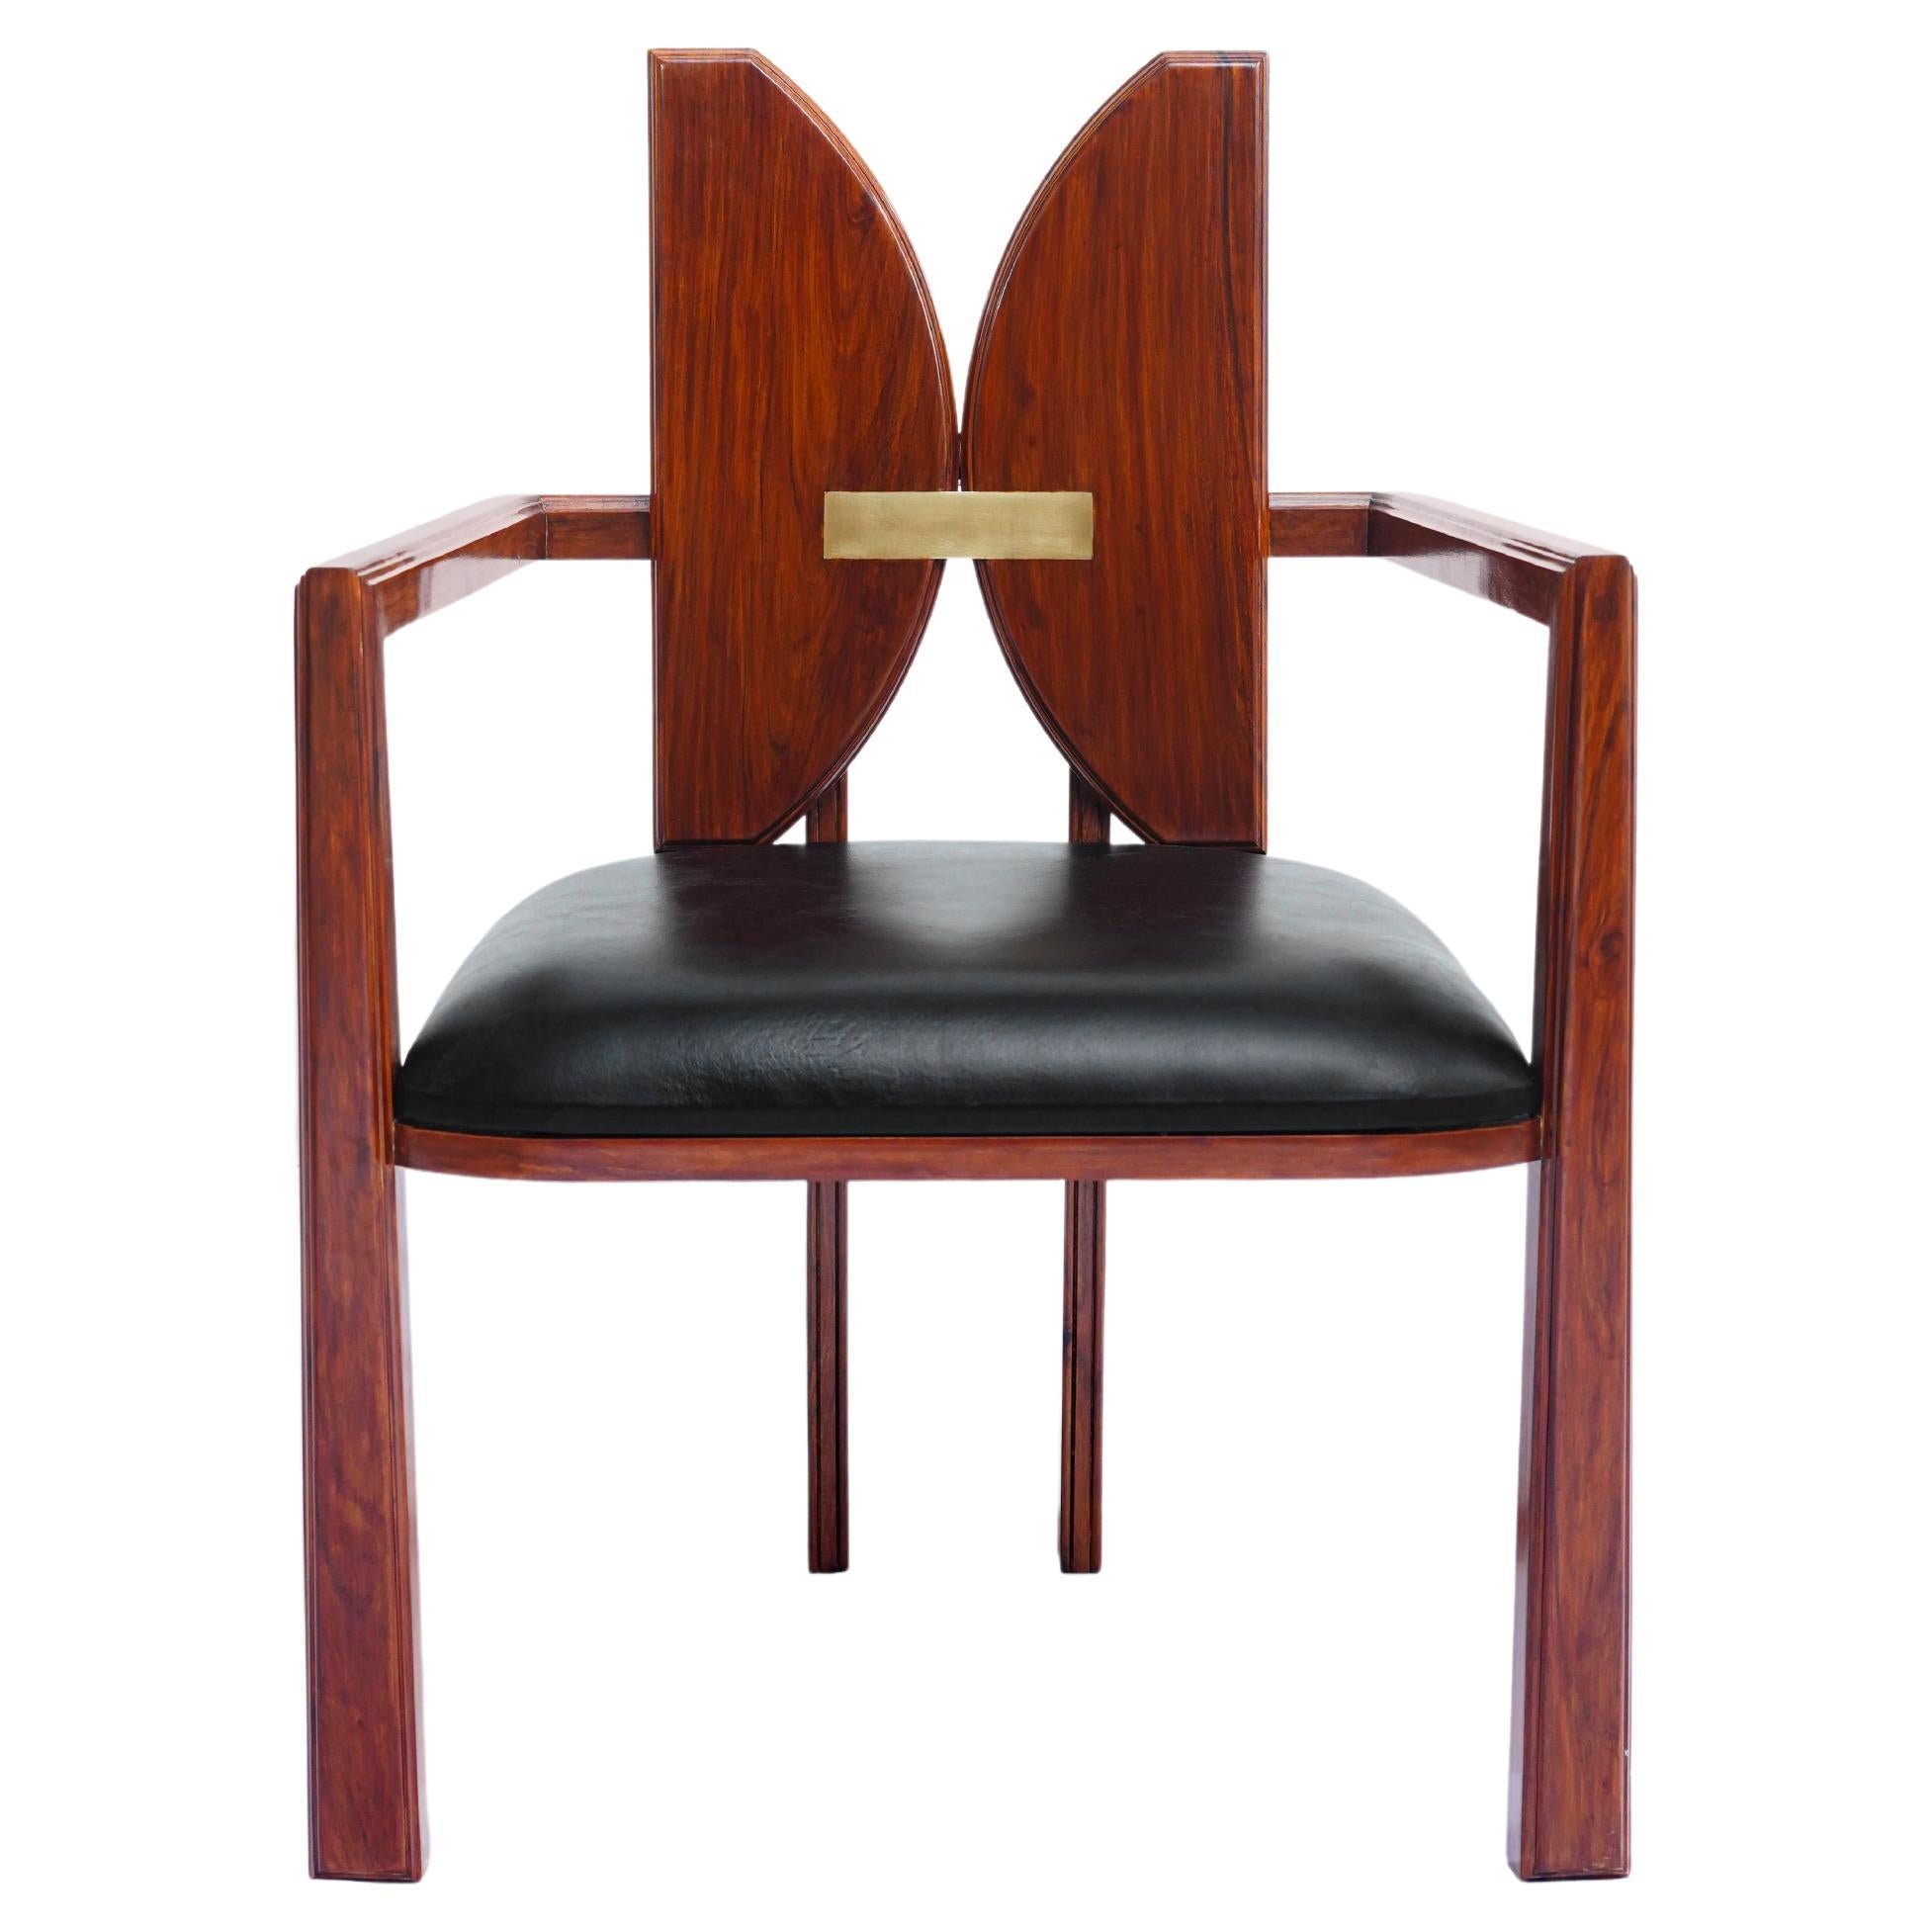 original, Geometric, transitional style, art nouveau, bold, modern dining chair For Sale